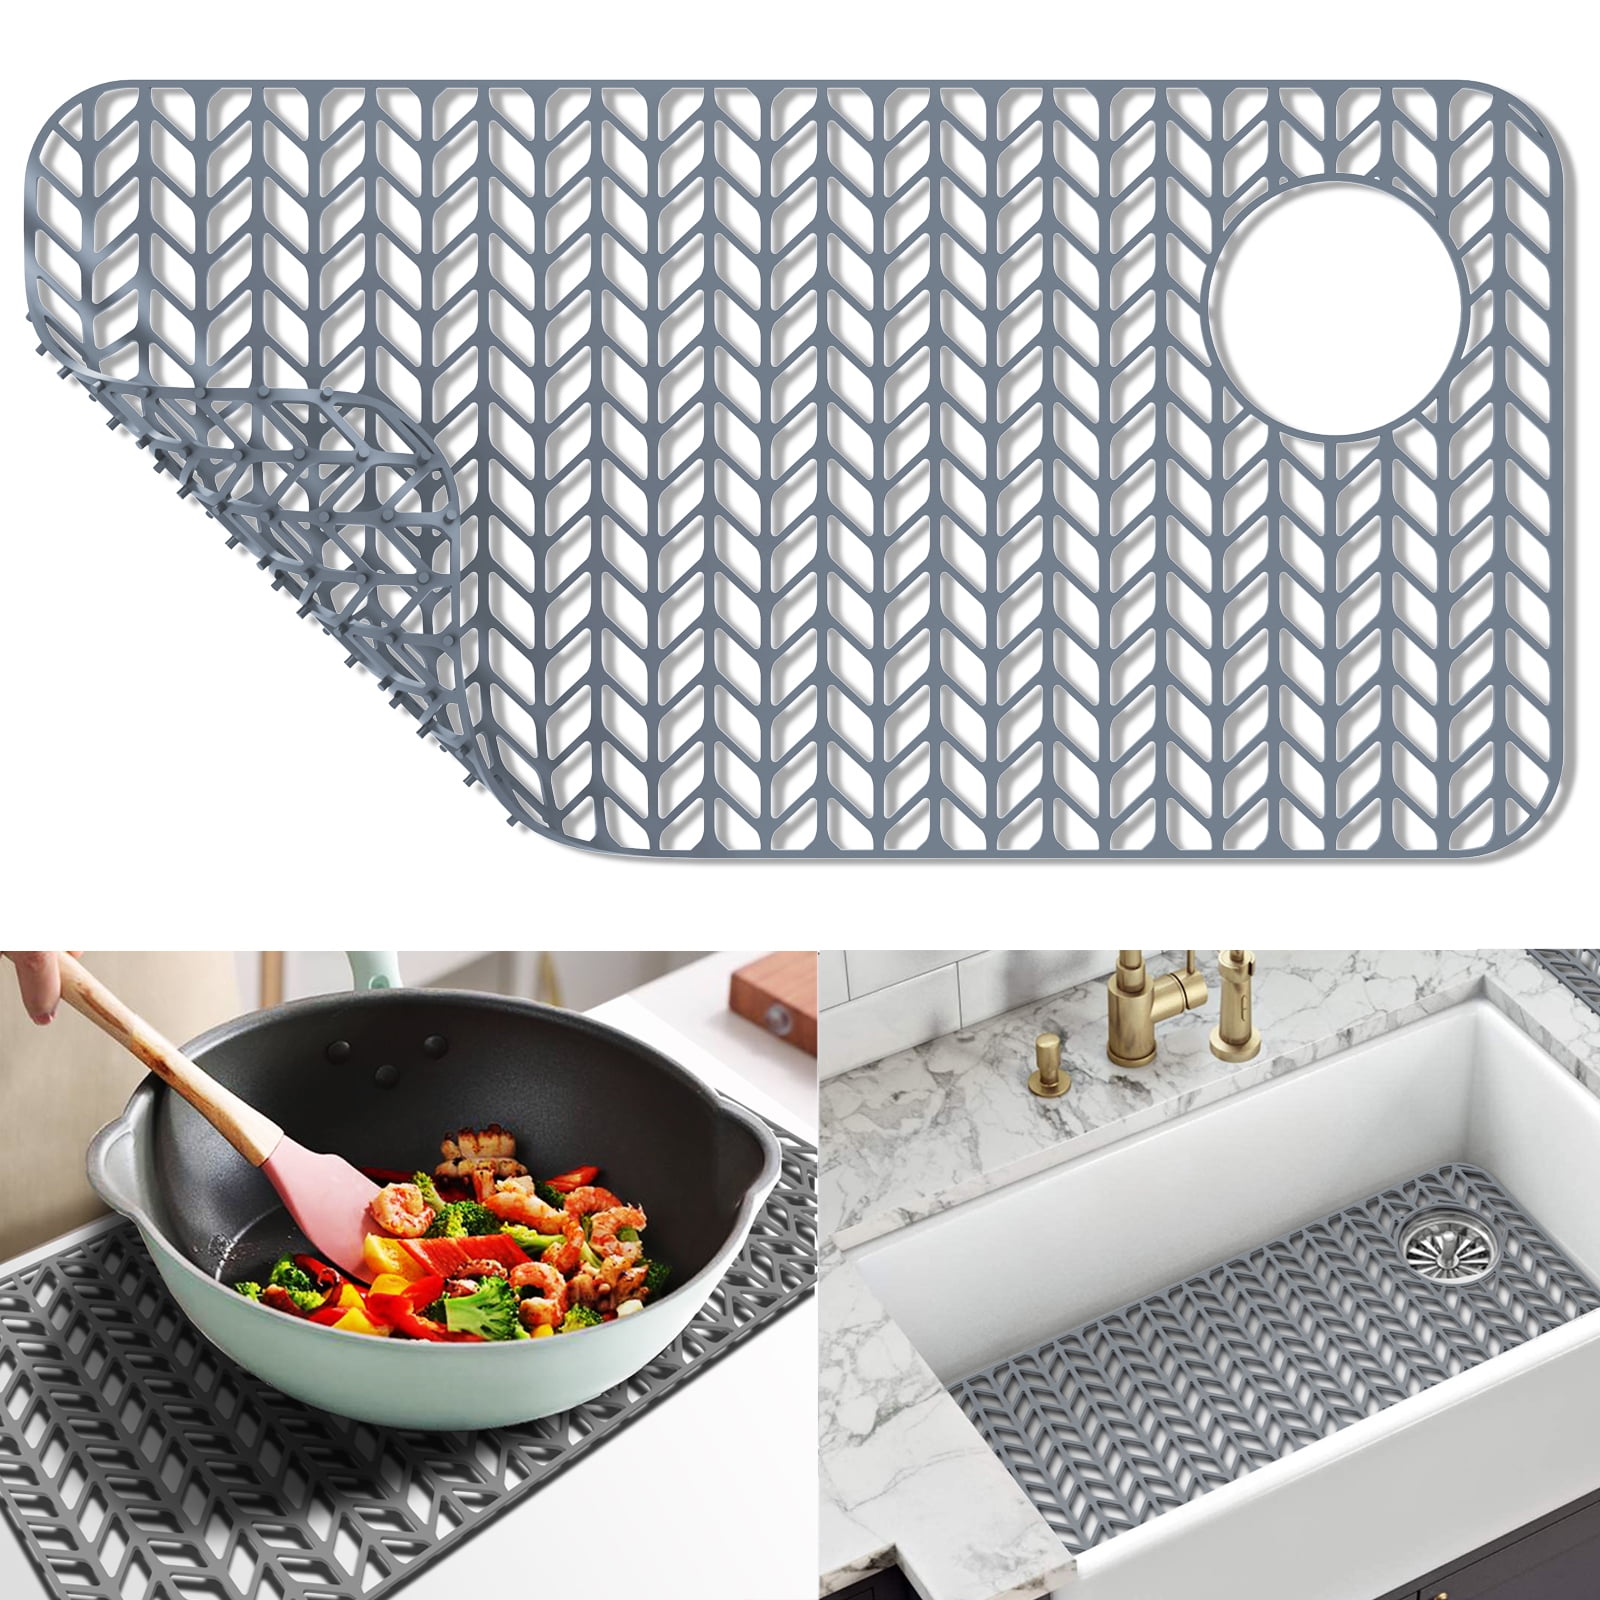 Kitchen Sink Mats Can Be Sheared 29.5″X15″ Sink Protectors for